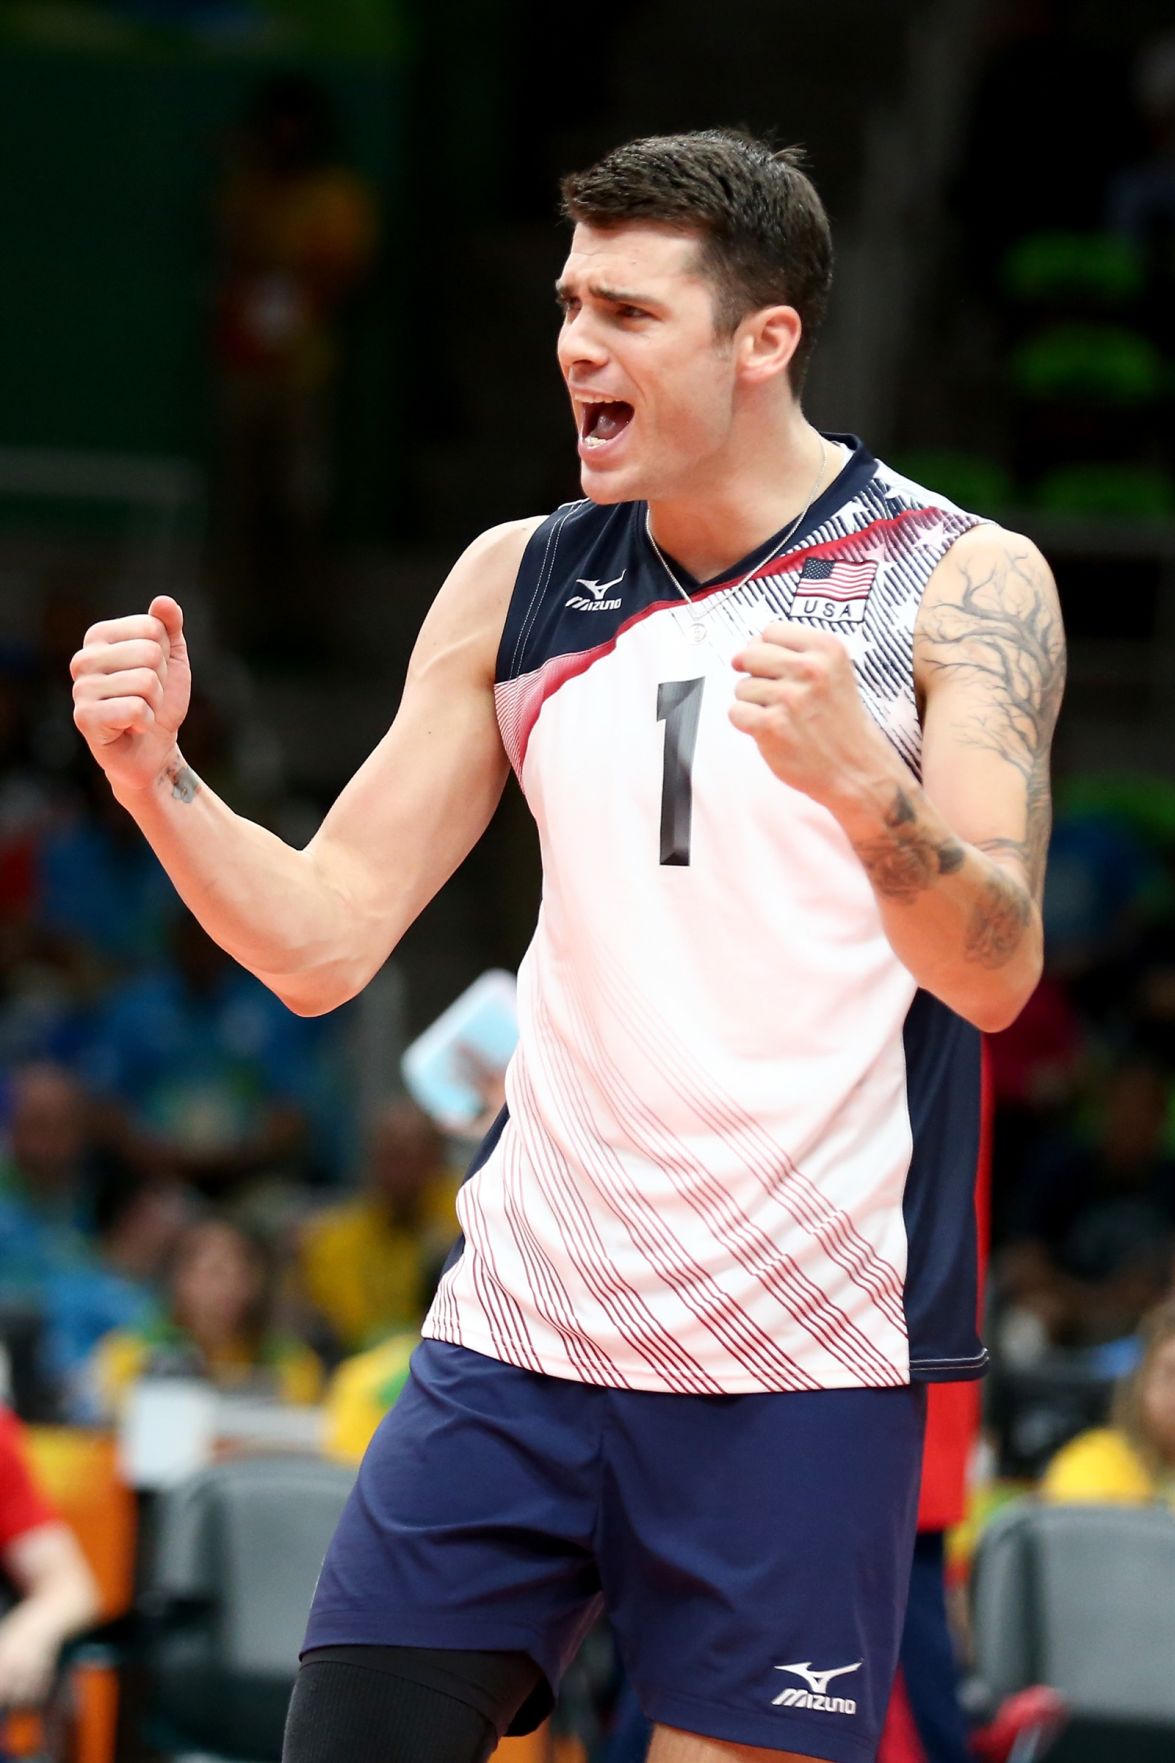 just volleyball  Wallpapers of Matt Anderson and Max Holt asked by